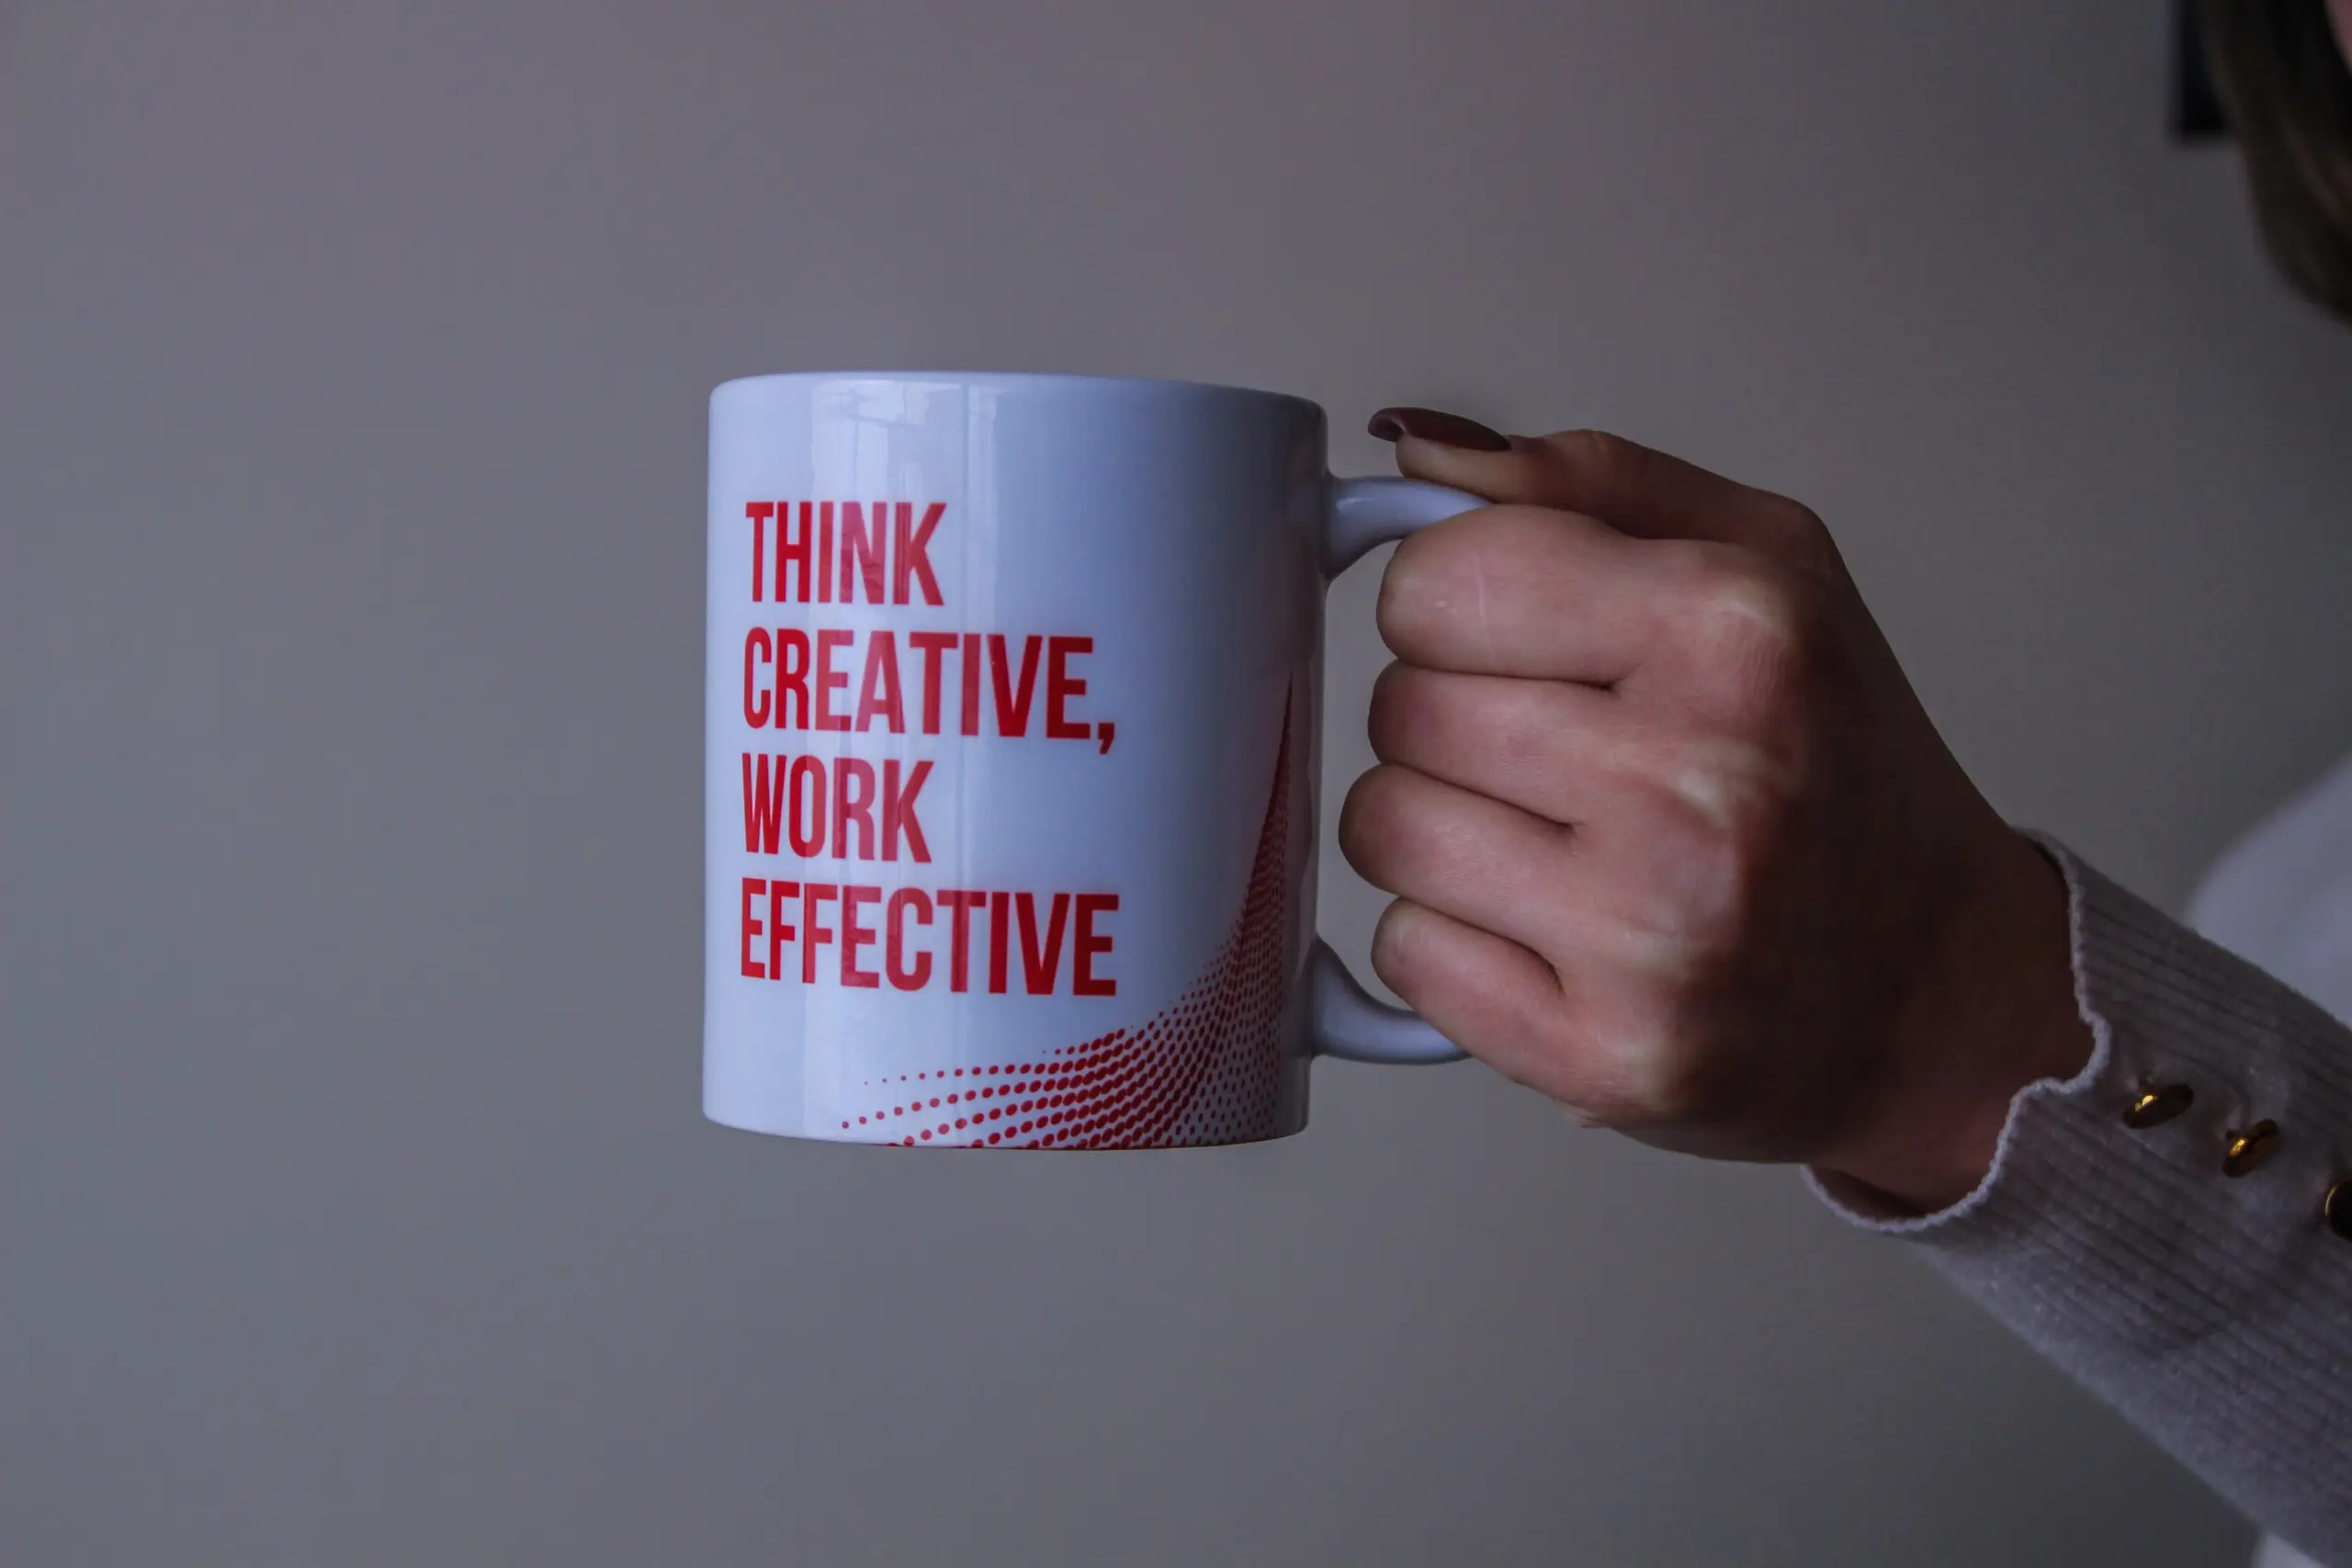 A hand holding a cup with a phrase "Think Effective, Work Effective" written on it